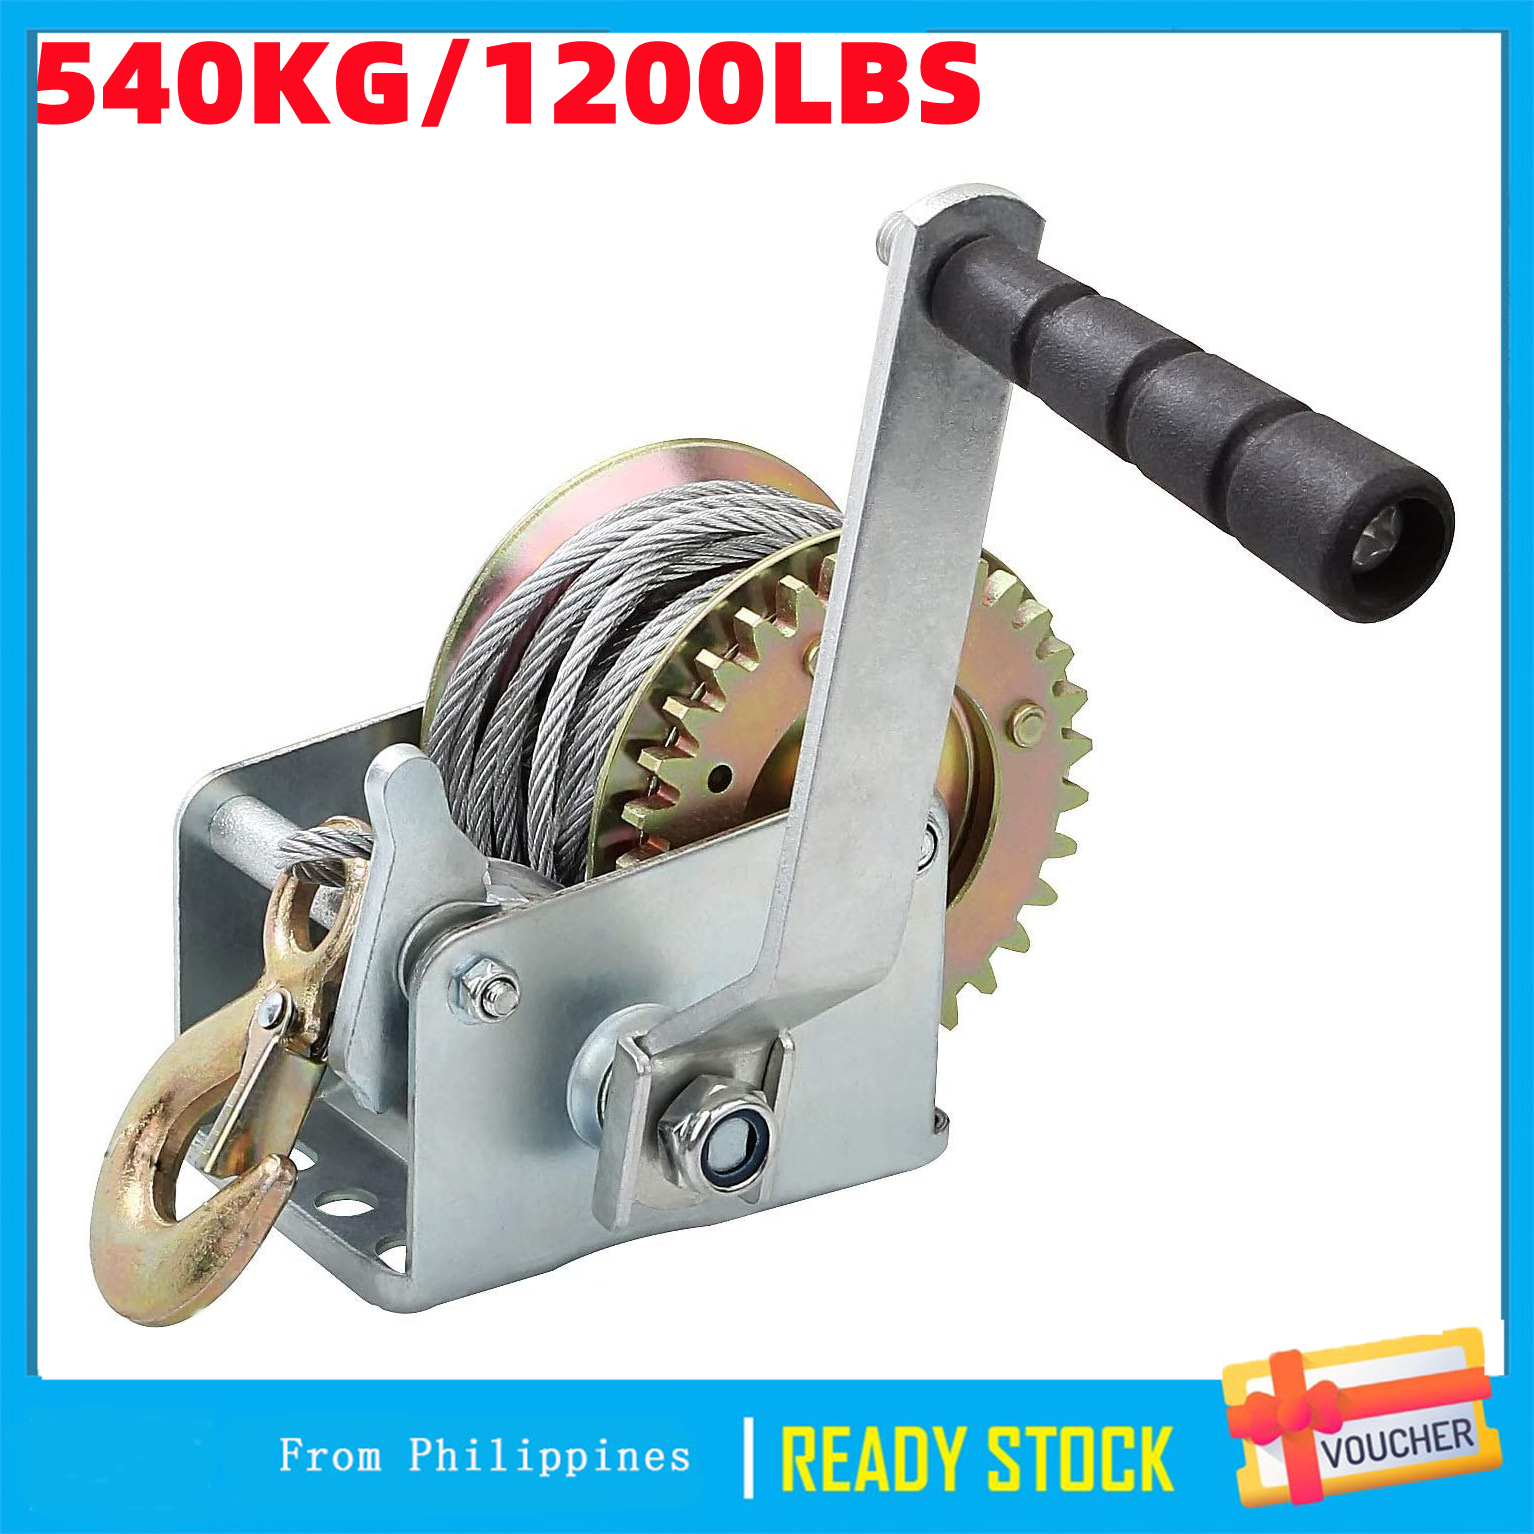 Smooth Action 1200LBS with 10m Steel Wire Rope Boat Trailer Heavy Duty Hand Winch Puller Hand Crank Gear Winch 